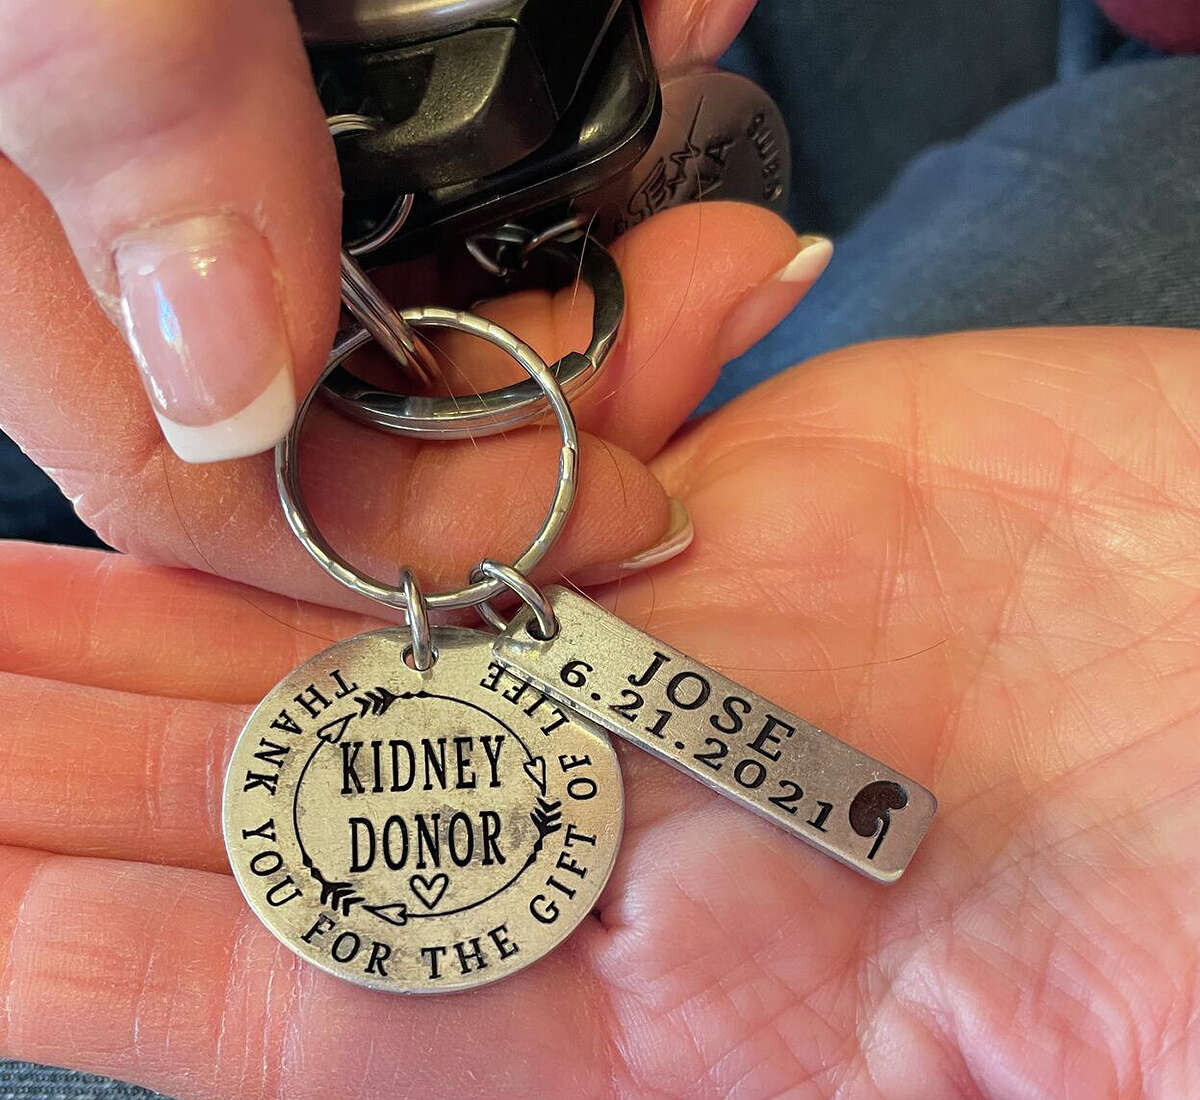 Jose Cruz's wife, Amanda, gave Jamie Norton this kidney donor keychain with Jose's name on it and the date of the transplant.